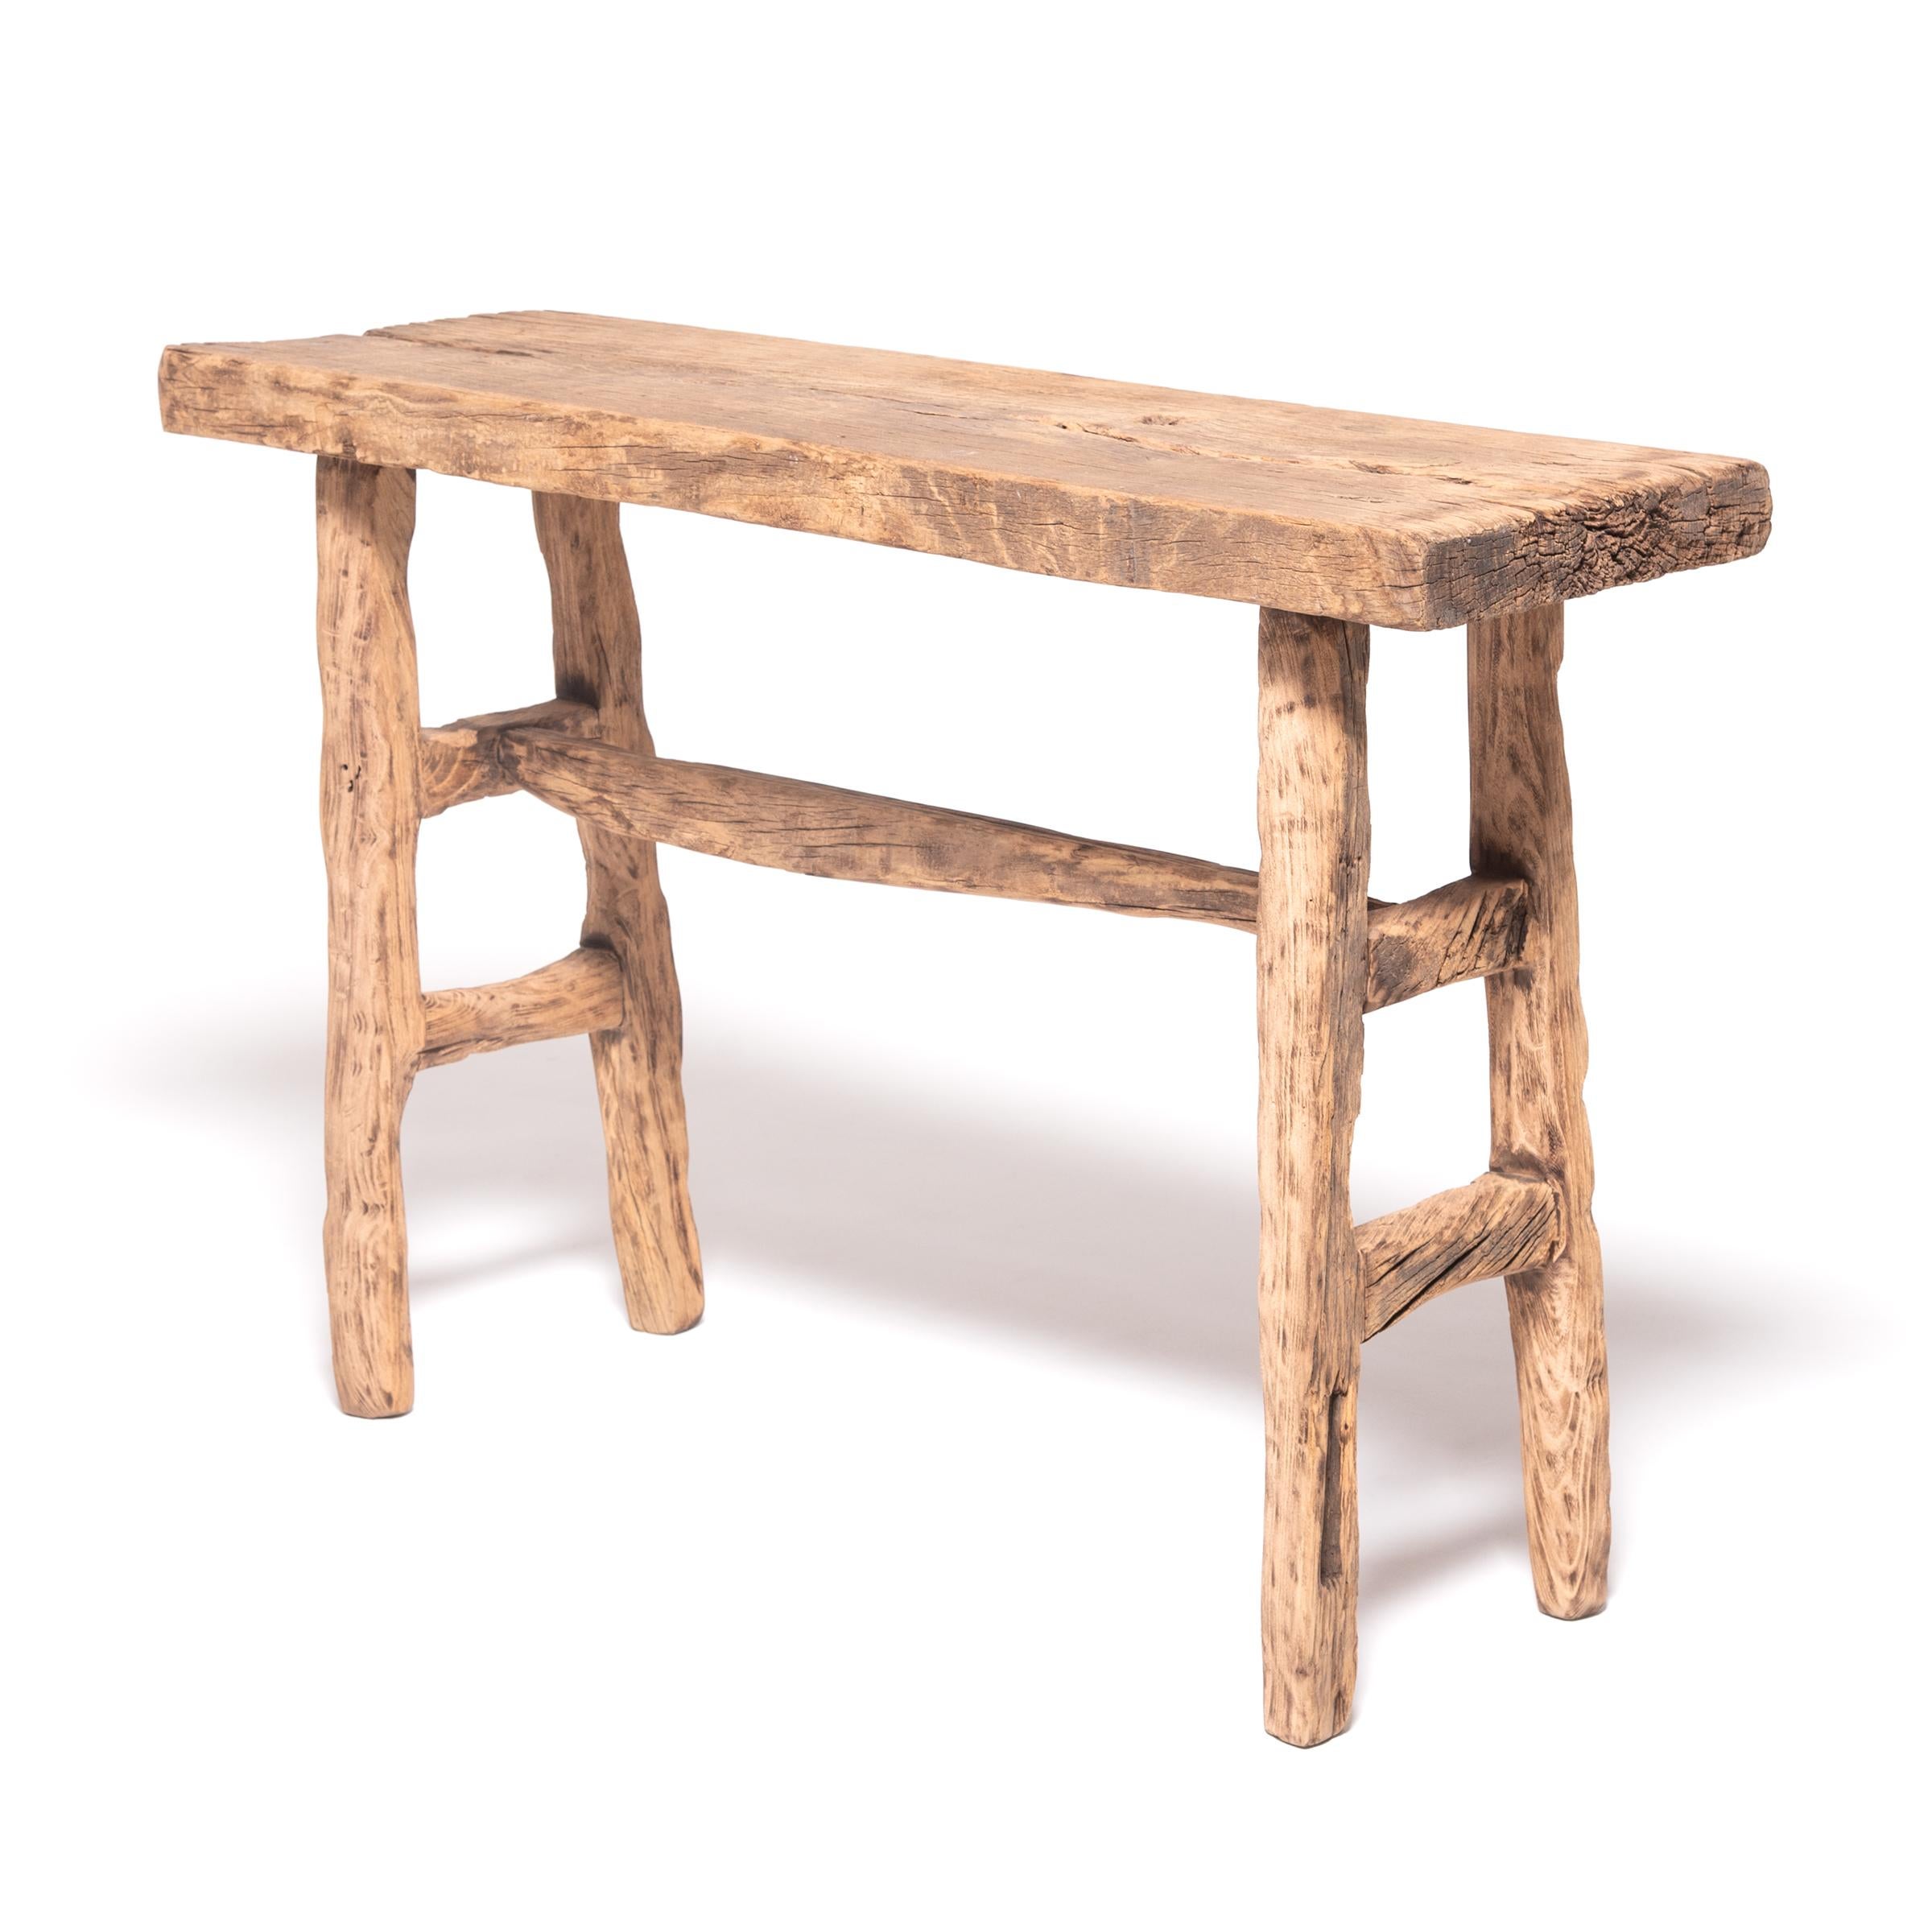 Made of wood reclaimed from 18th century Chinese buildings, this contemporary altar table is the epitome of farmhouse modern. Skilled in traditional joinery techniques, our craftspeople fashioned a simple, portable table, much like those that would